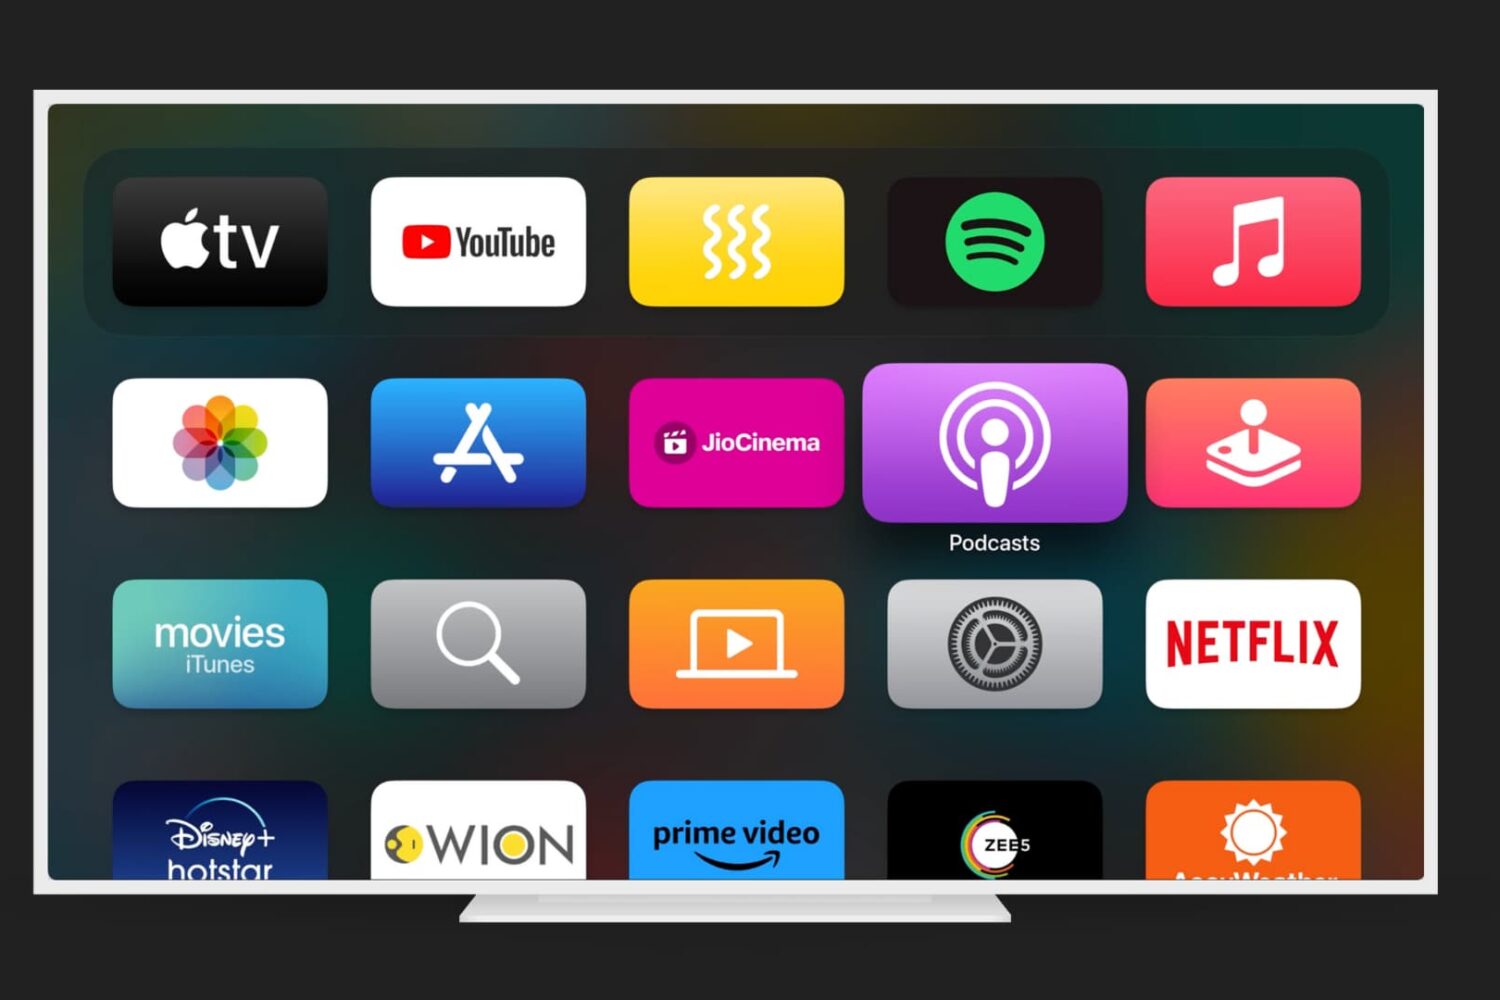 Apple TV Home Screen with Podcasts app highlighted